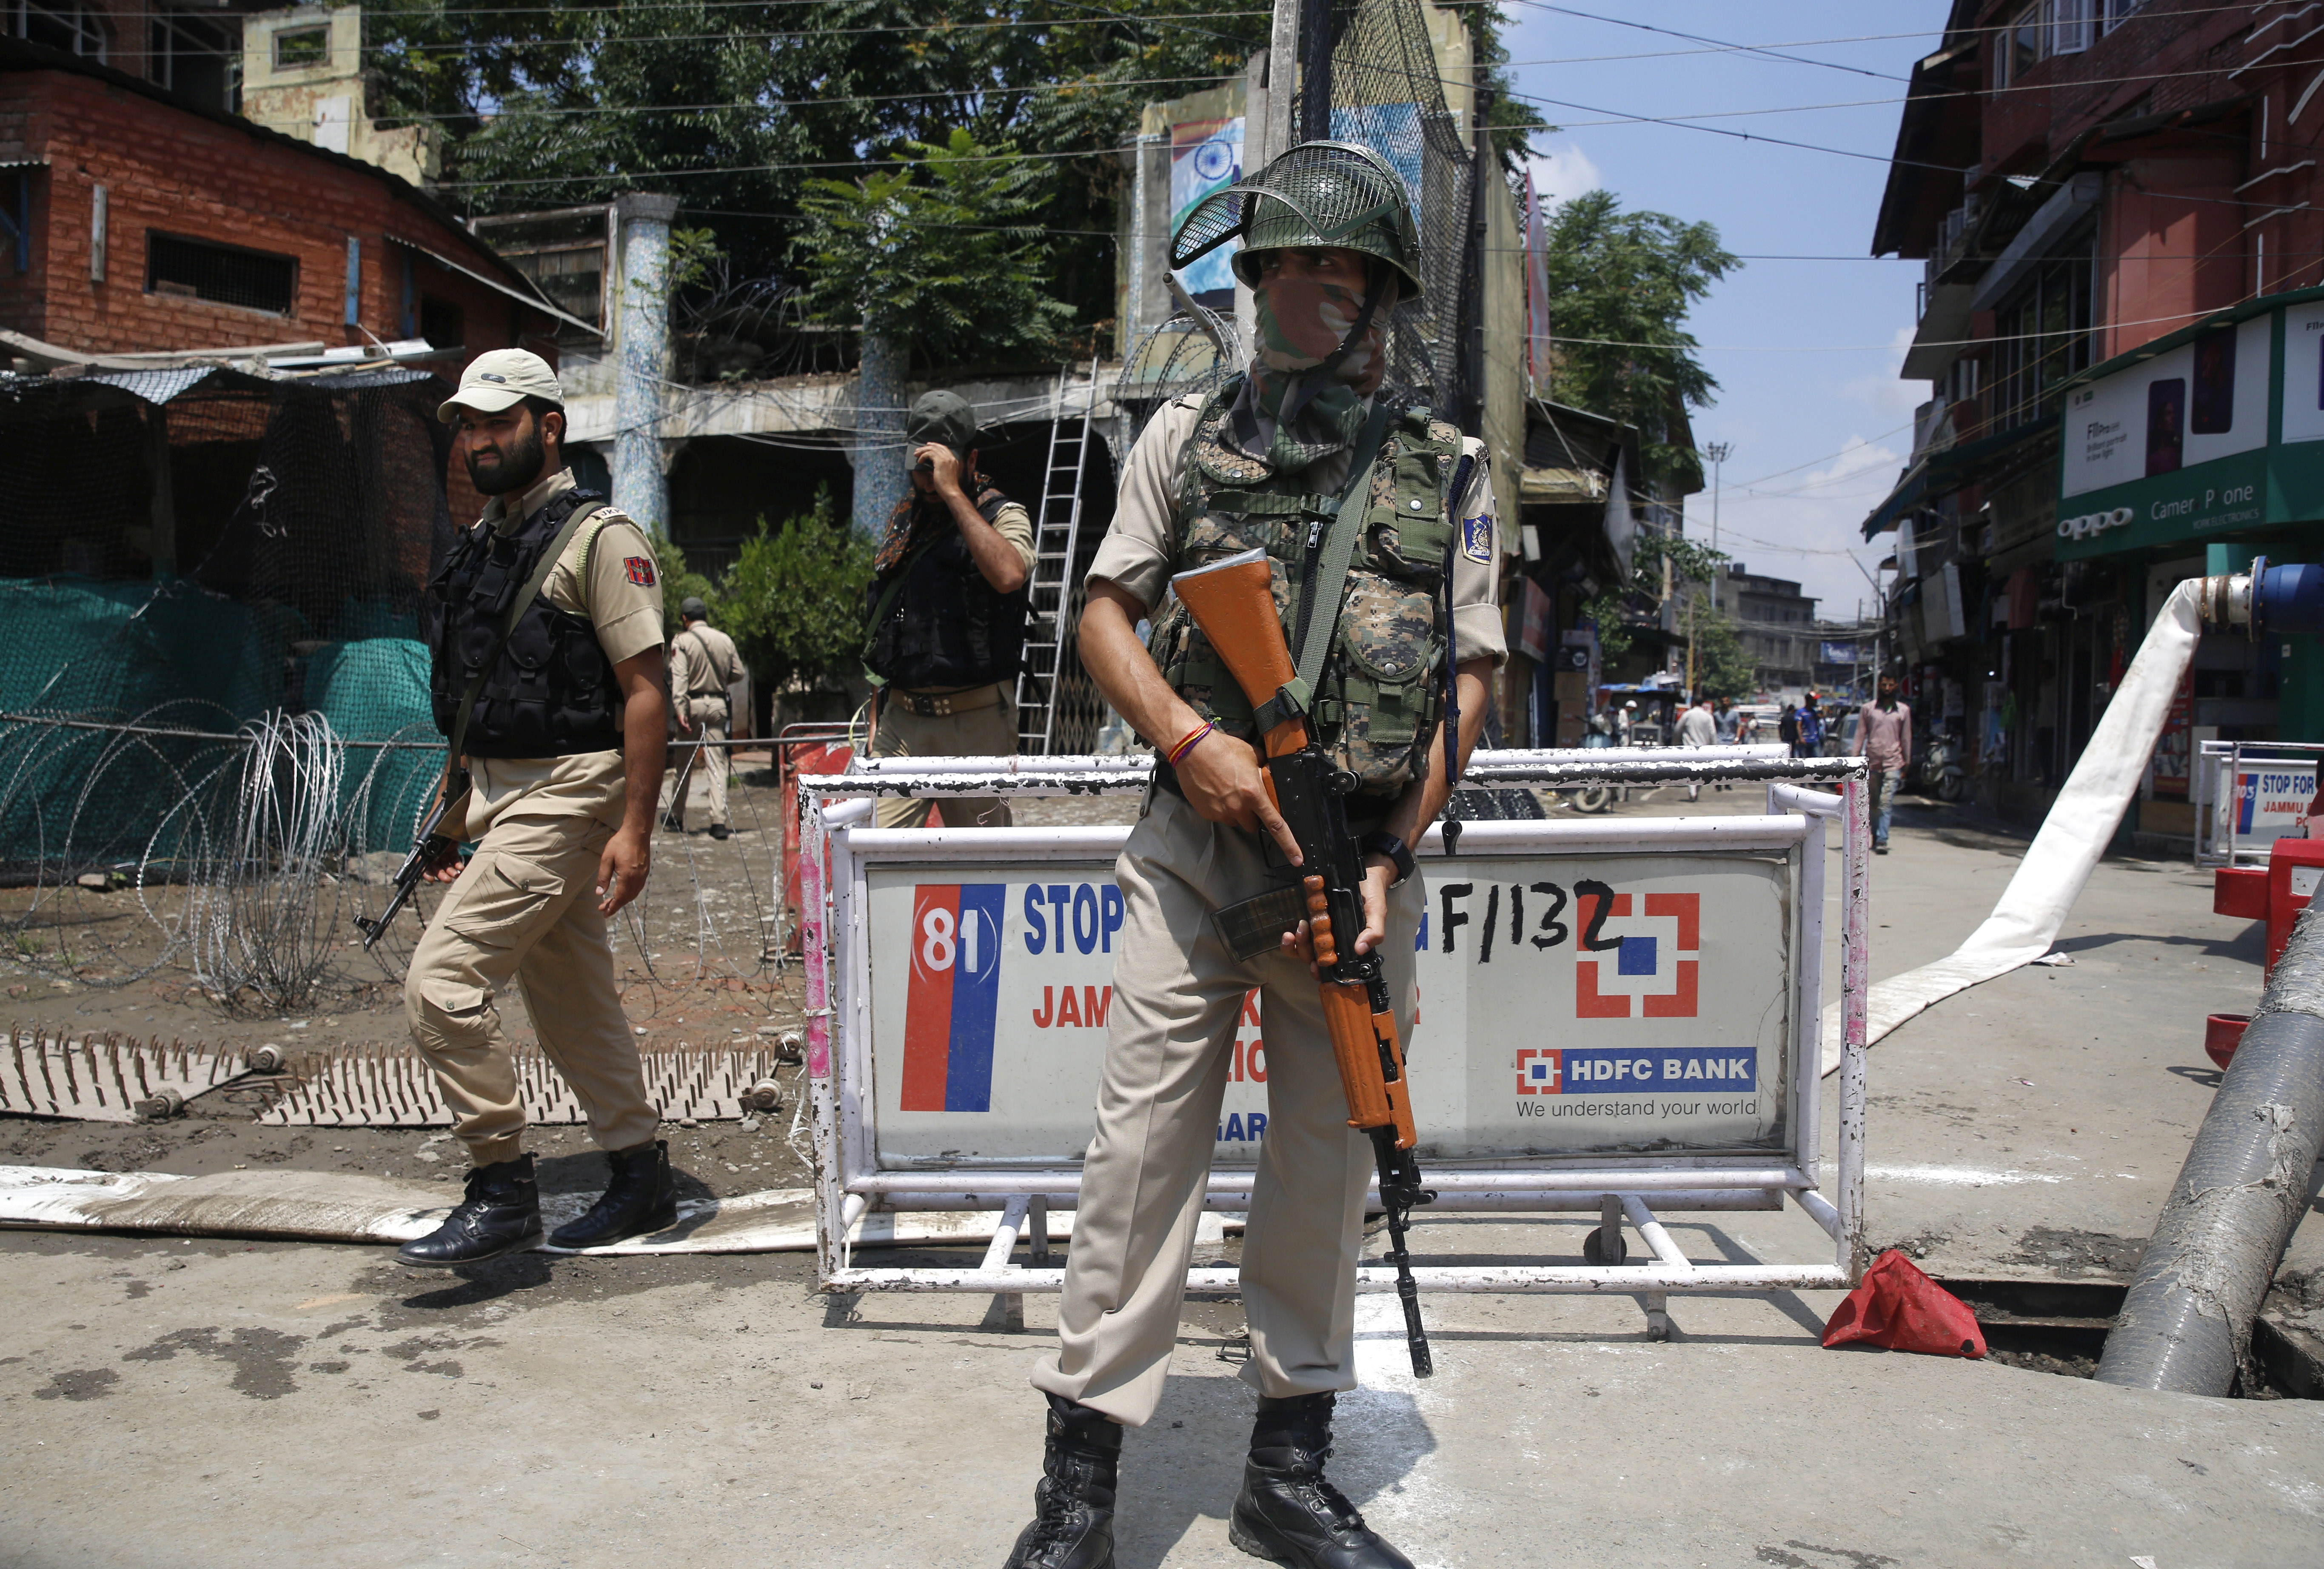 epa07753104 An Indian paramilitary soldier stands guard as policemen walk past in Srinagar, the summer capital of Indian Kashmir, 02 August 2019. According to local news reports over 280 companies of paramilitary forces are being deployed in the Kashmir valley.  EPA/FAROOQ KHAN